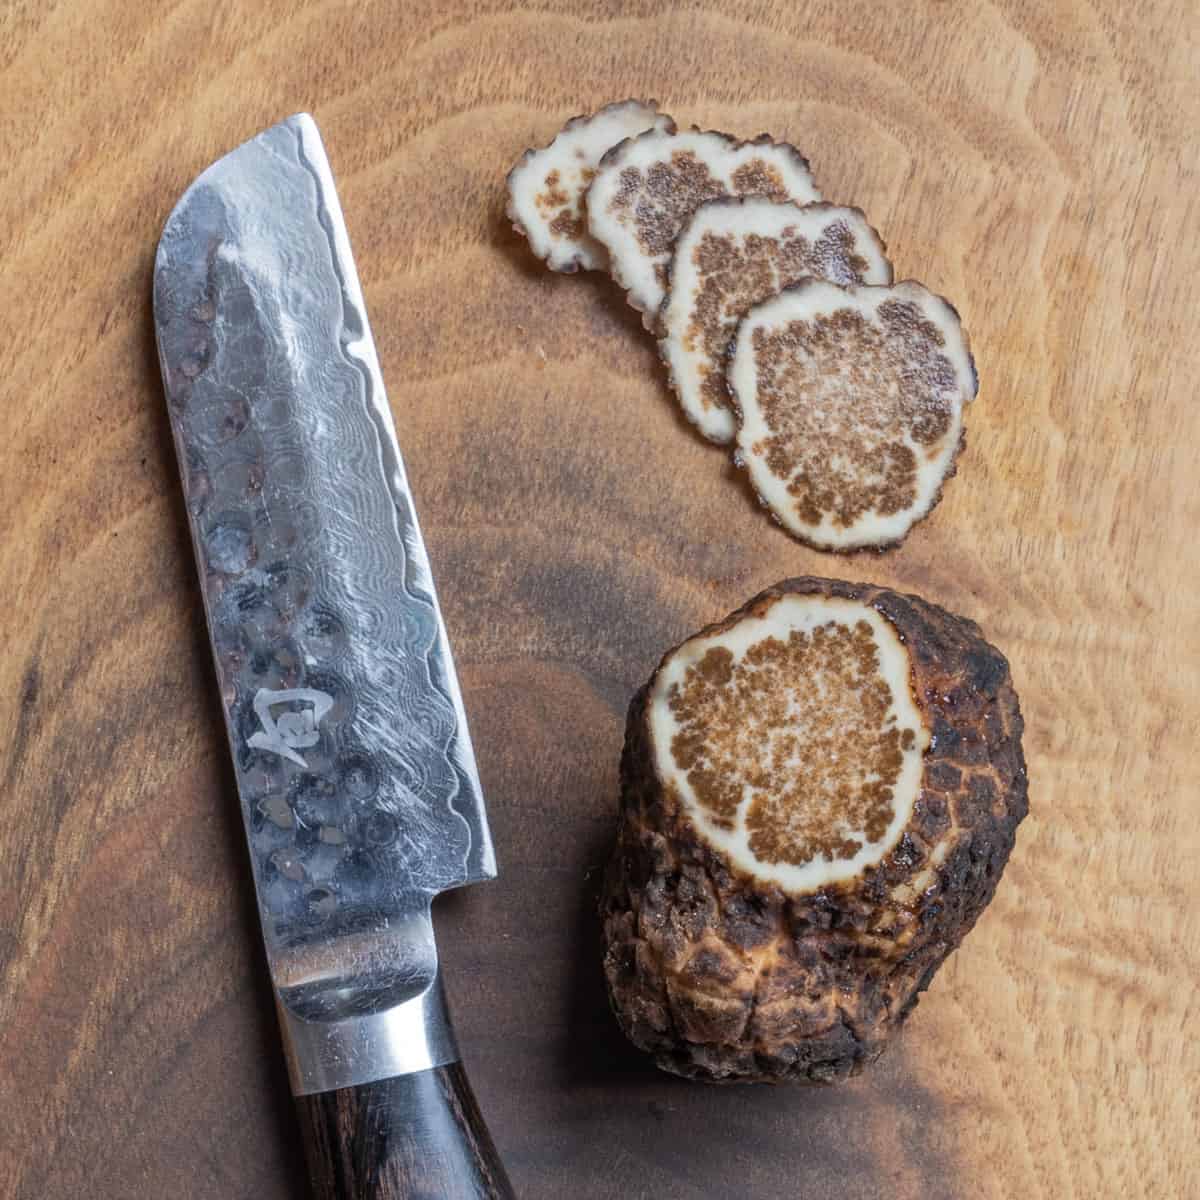 A blue ridge truffle on an oak board, cut with slices fanned out next to a knife